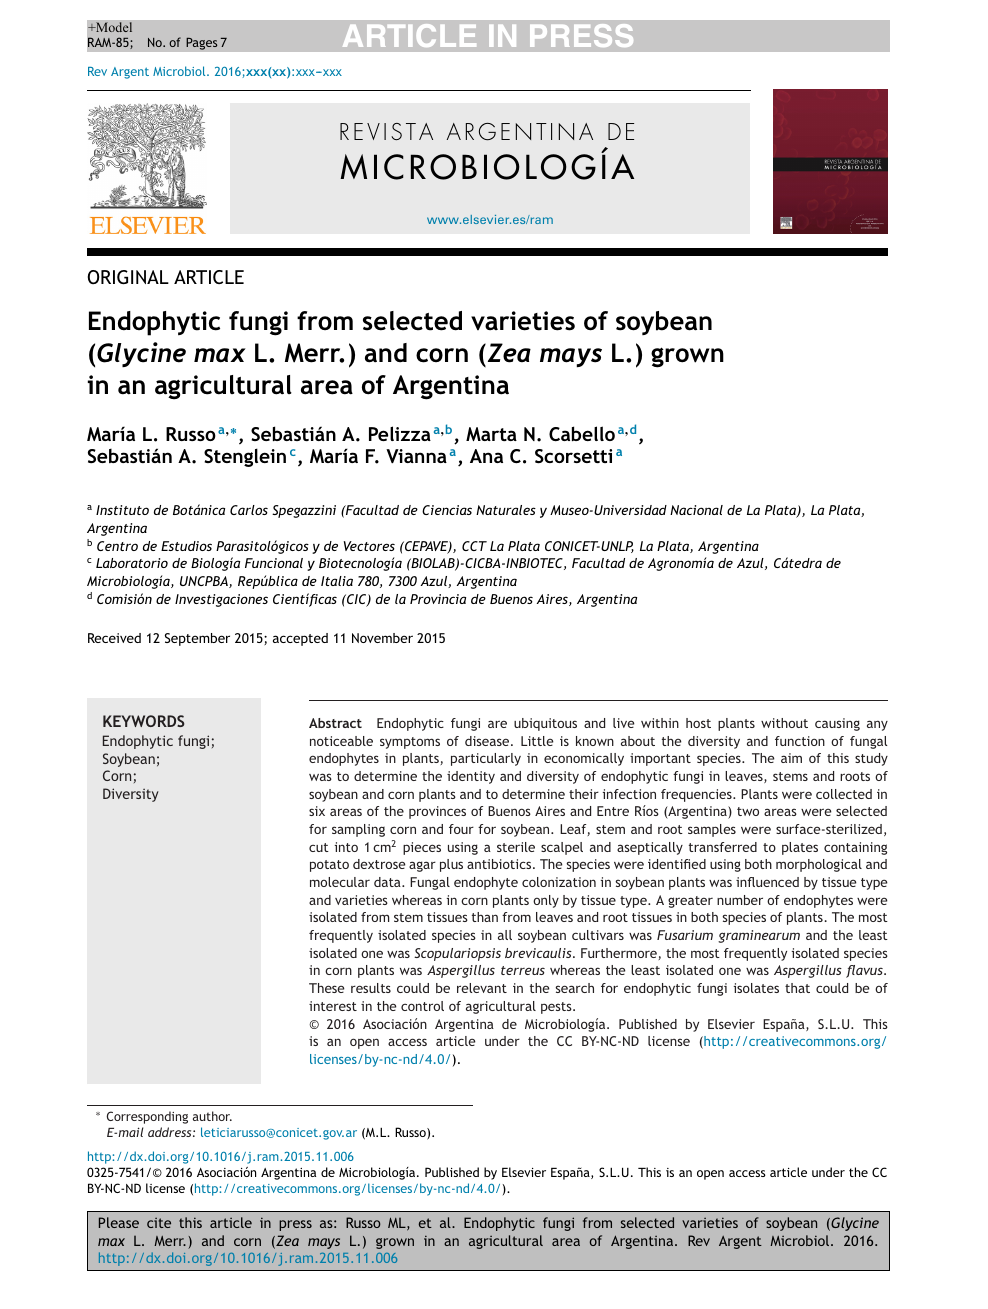 Endophytic Fungi From Selected Varieties Of Soybean Glycine Max L Merr And Corn Zea Mays L Grown In An Agricultural Area Of Argentina Topic Of Research Paper In Biological Sciences Download